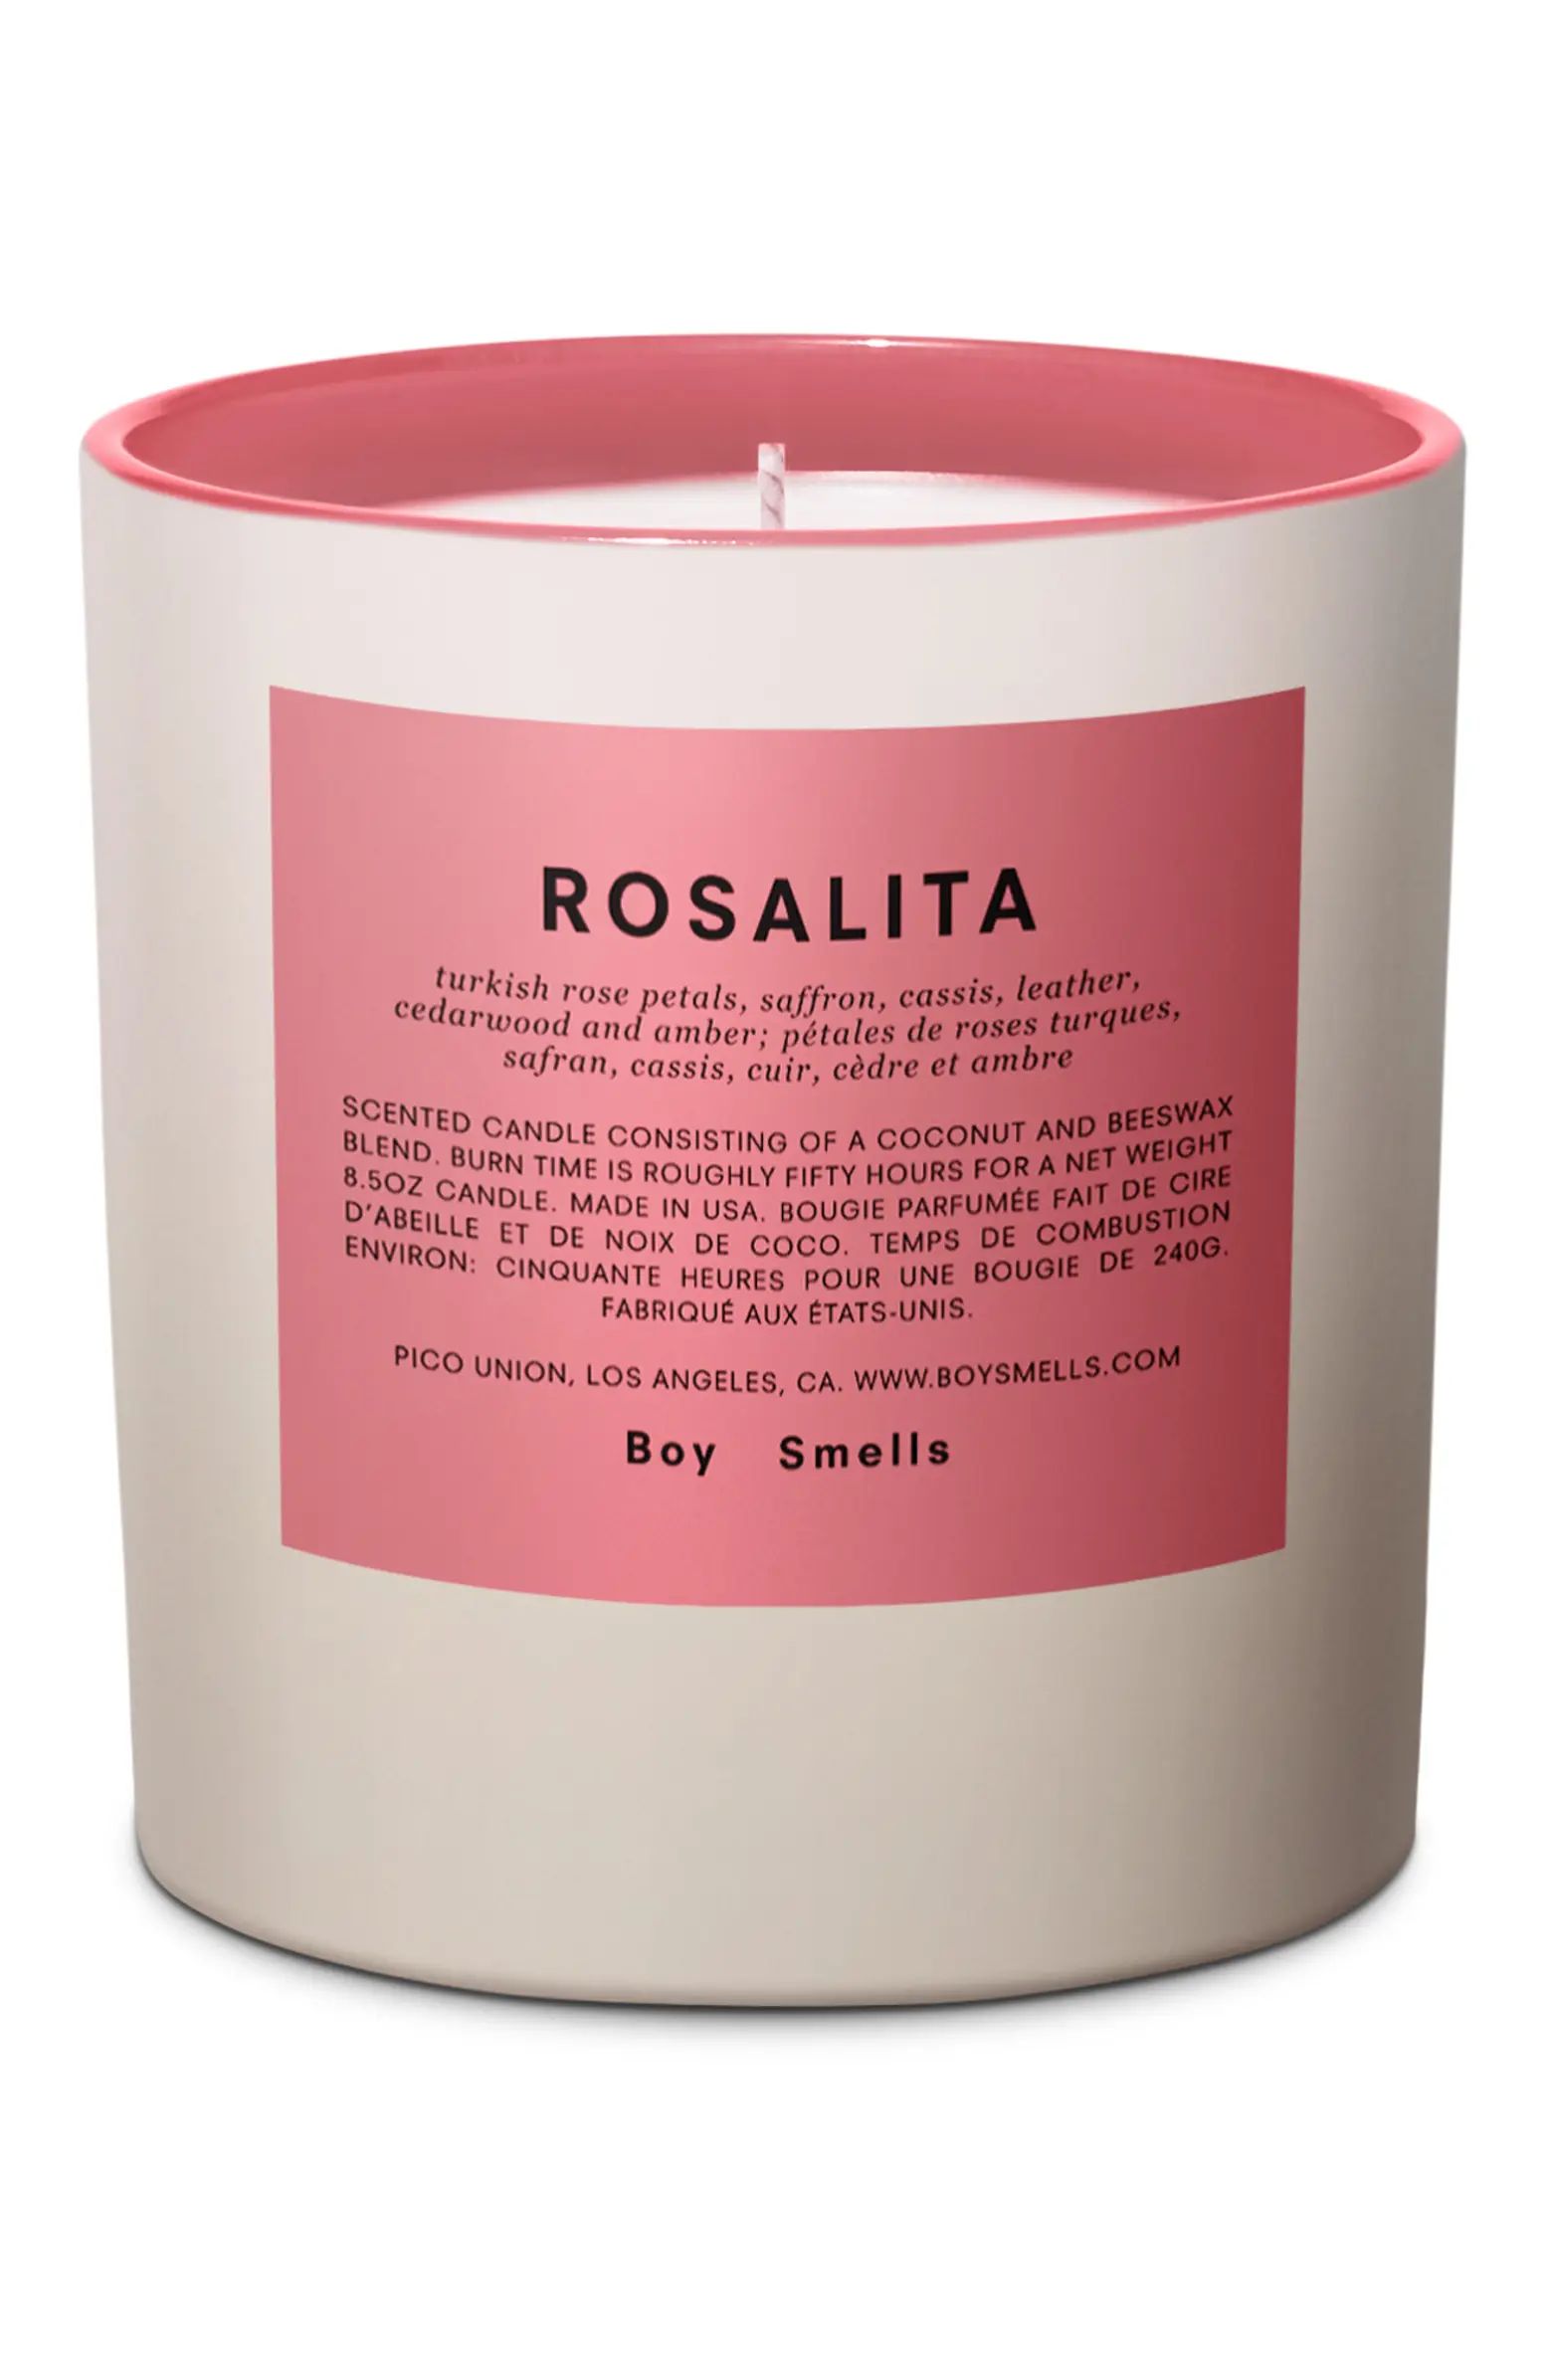 Pride Rosalita Scented Candle | Nordstrom